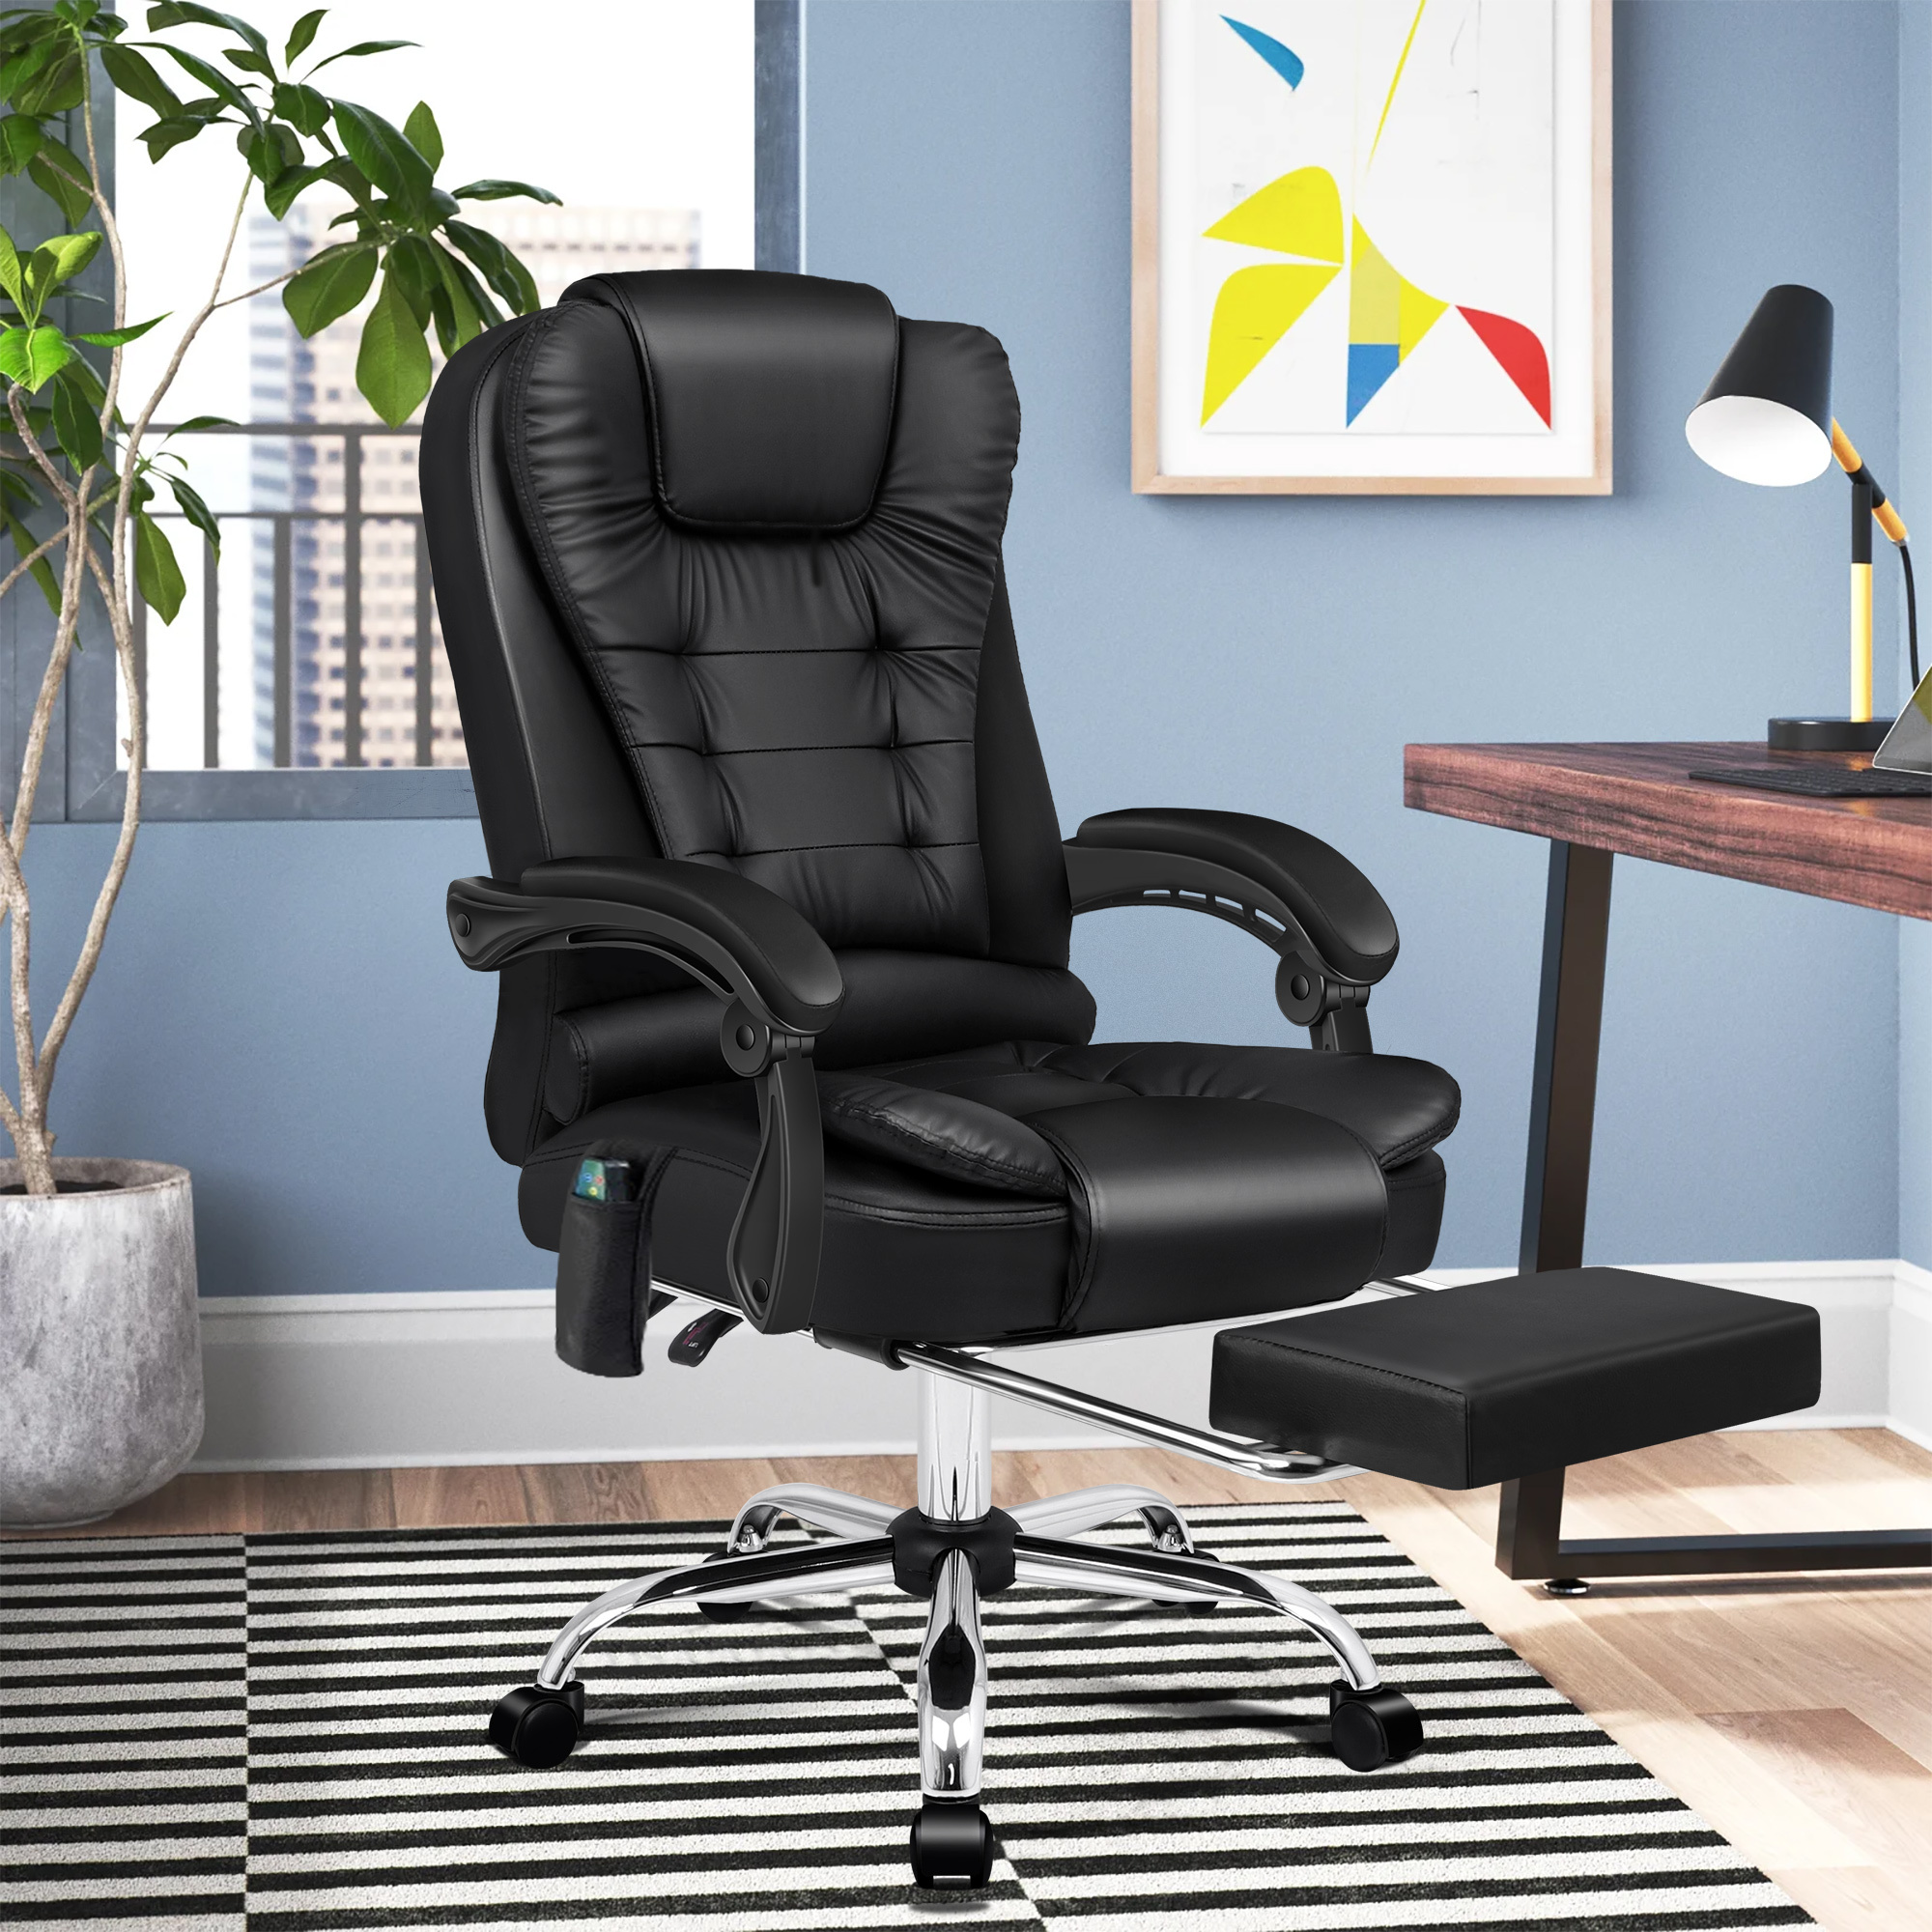 HoxtonRoom Galini PU Leather Heated Massage Office Chair | Temple & Webster